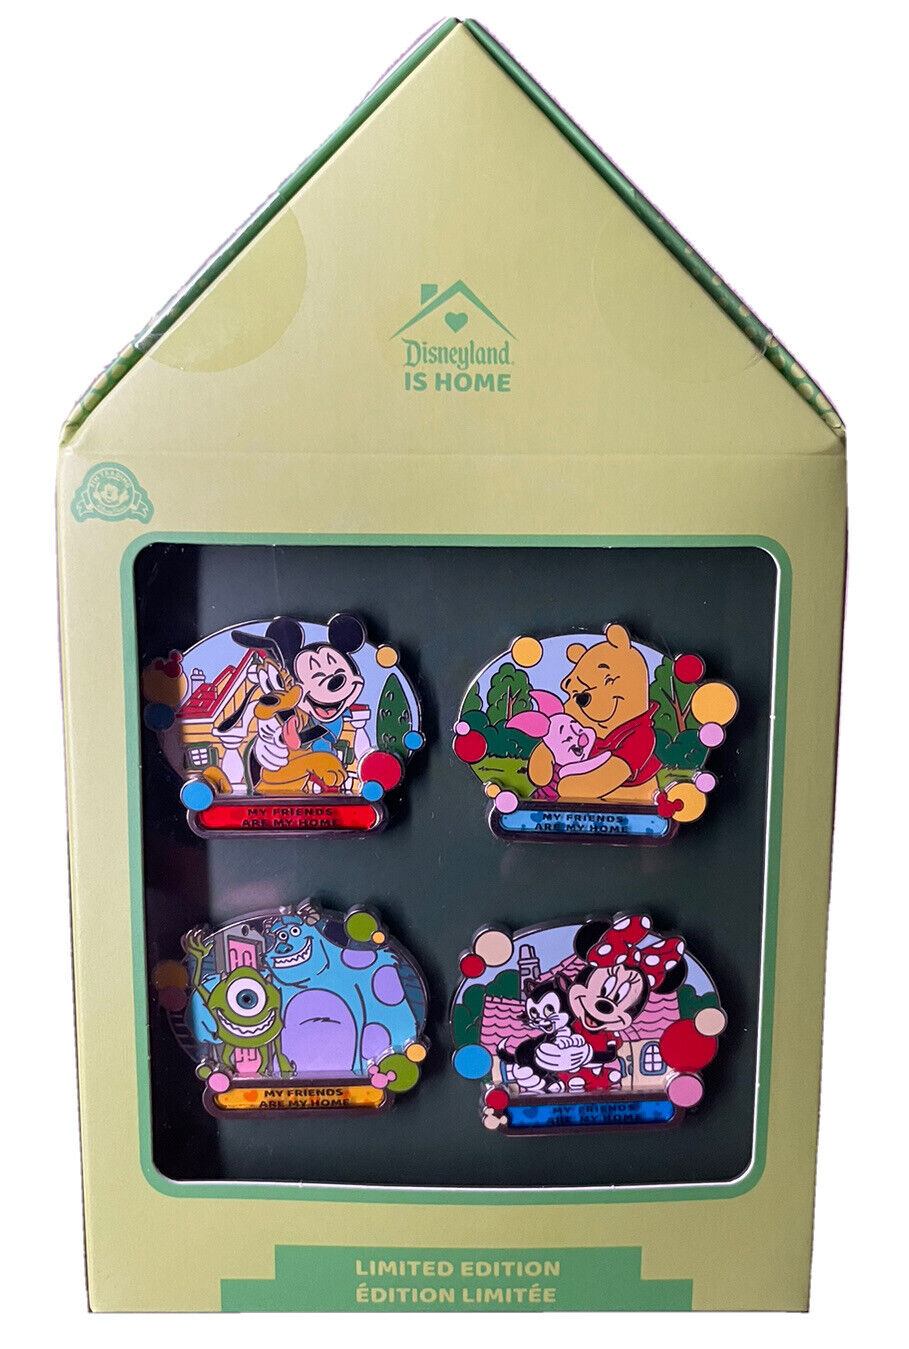 MY FRIENDS ARE MY HOME 4 PIN SET Mickey Pooh Mike Disneyland Is Home 2022